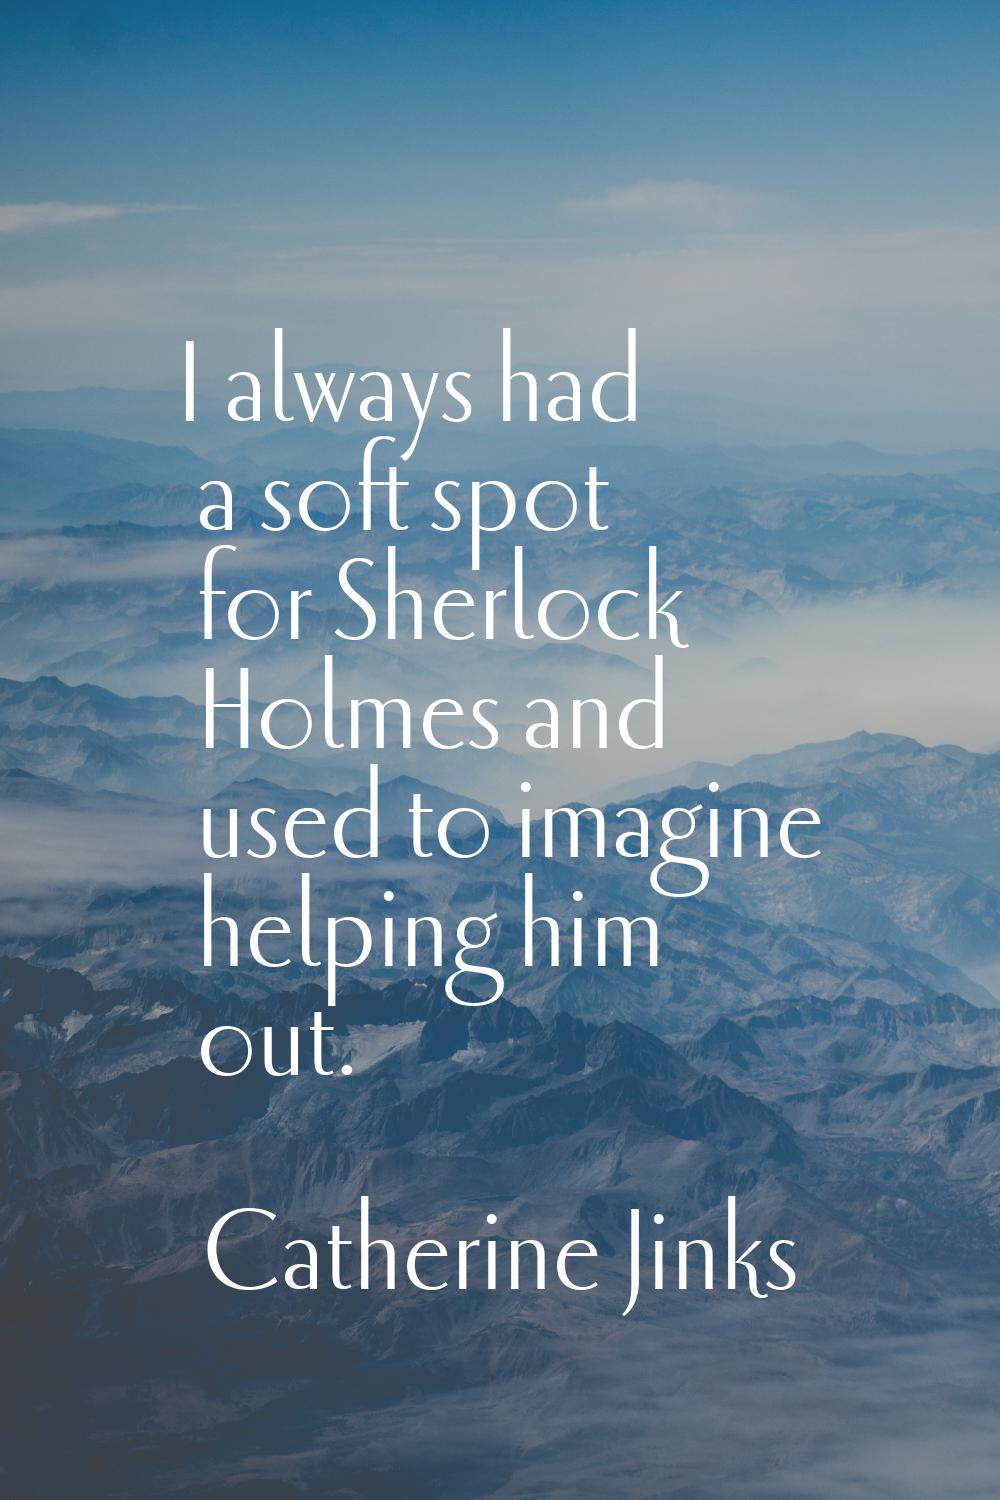 I always had a soft spot for Sherlock Holmes and used to imagine helping him out.